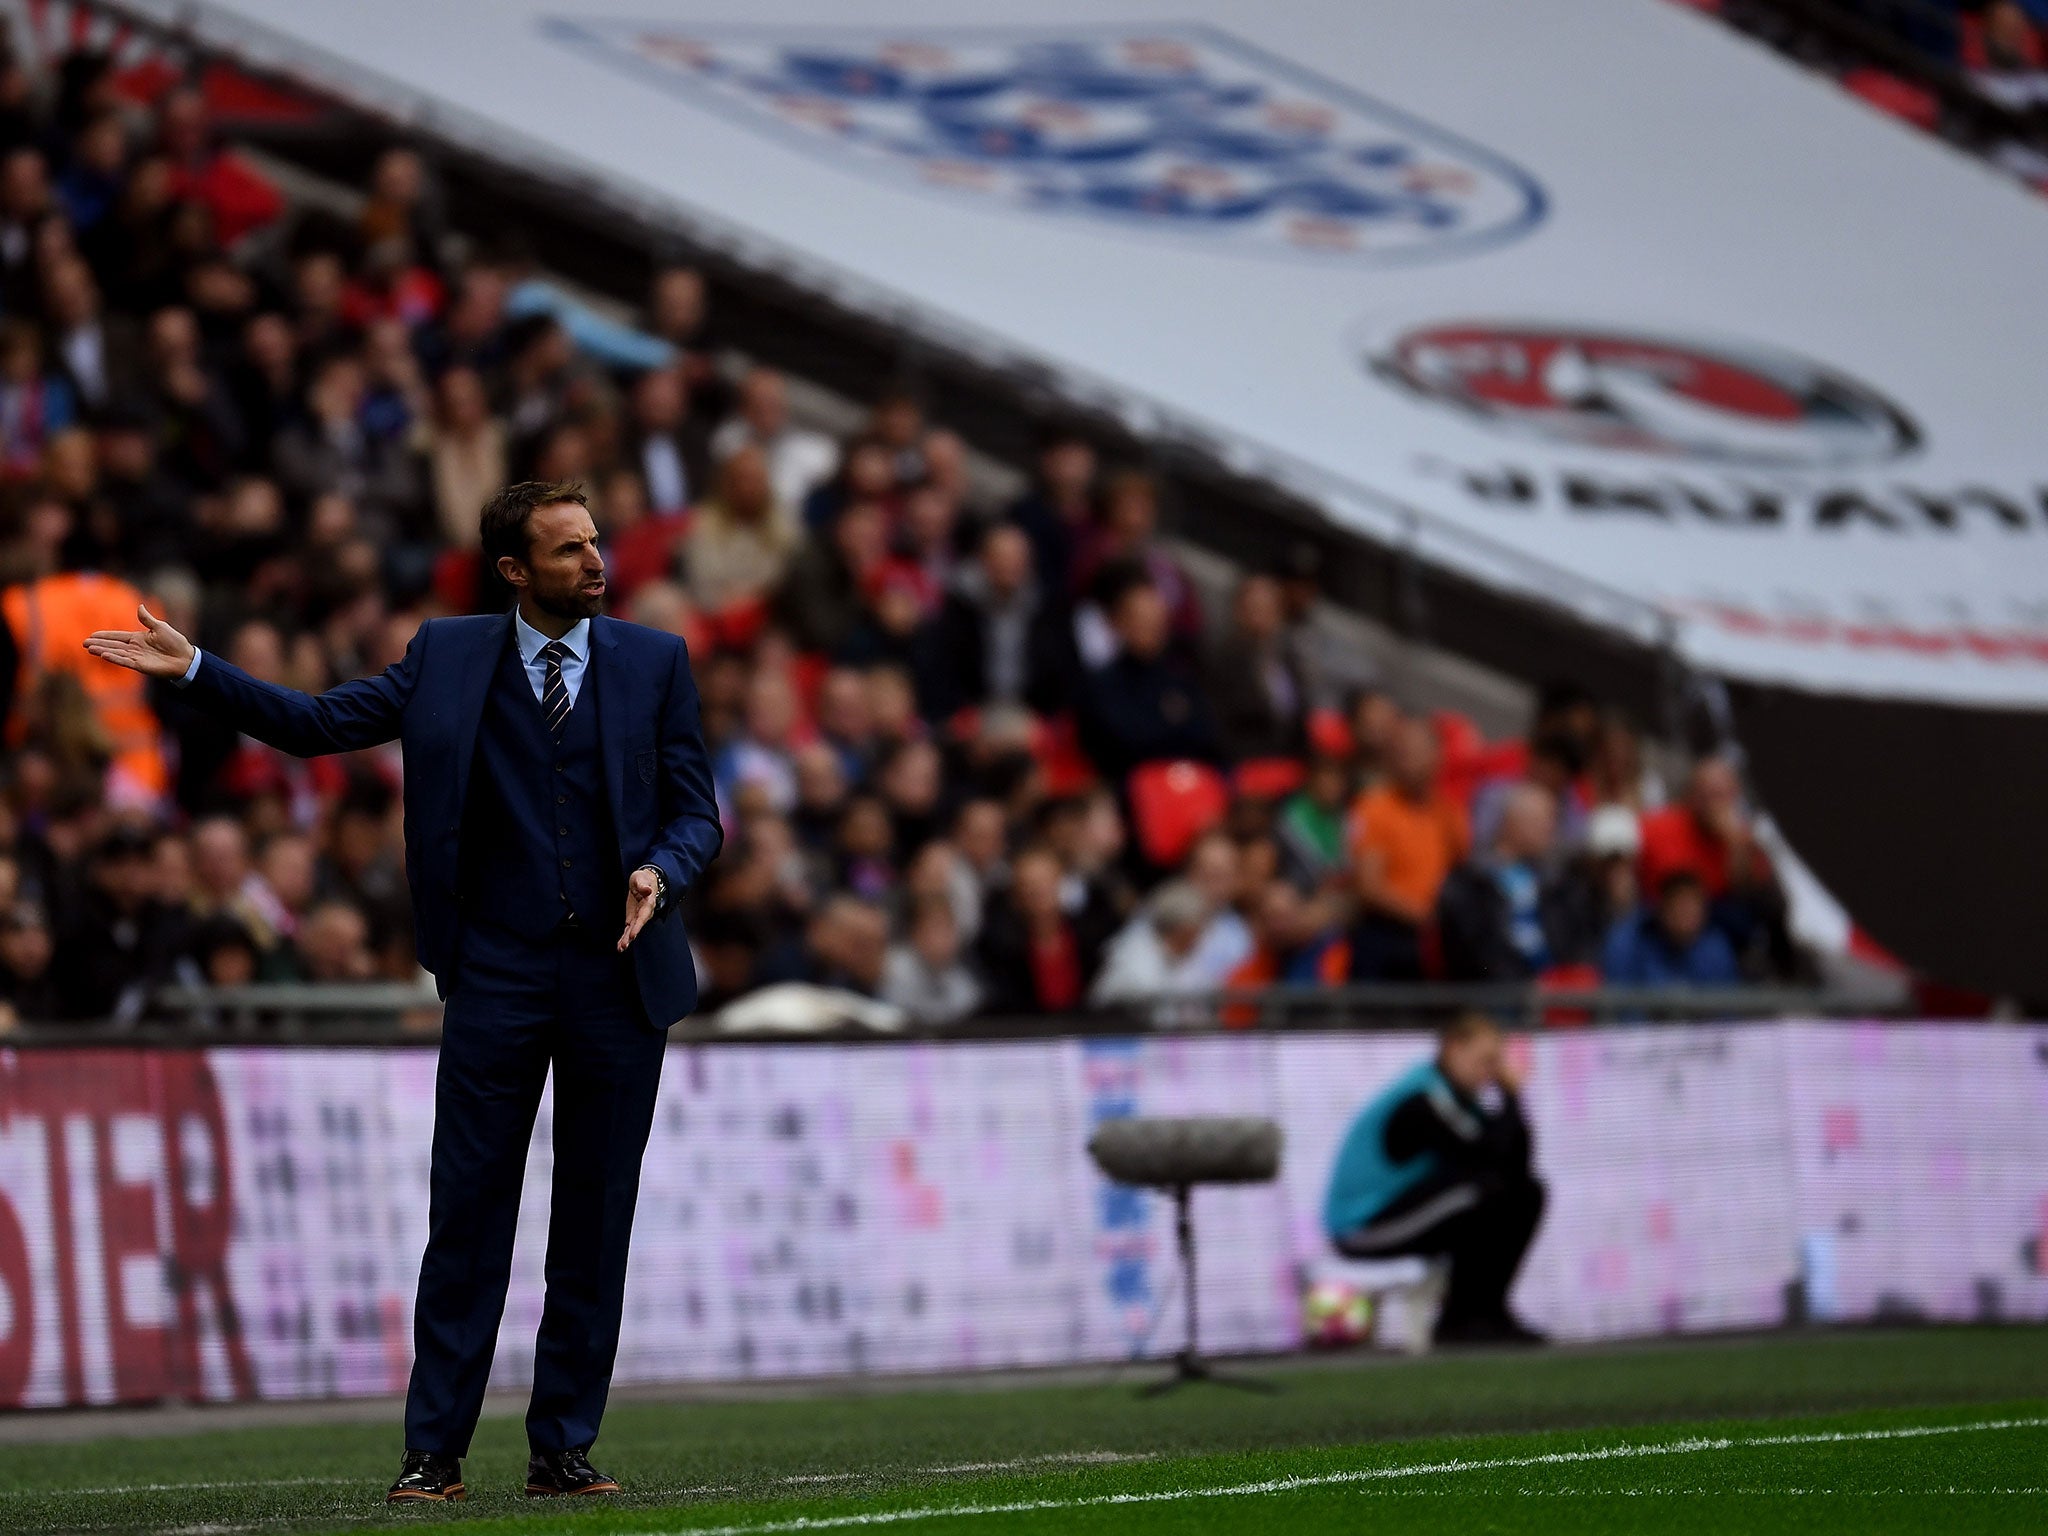 Gareth Southgate gives instructions from the sidelines